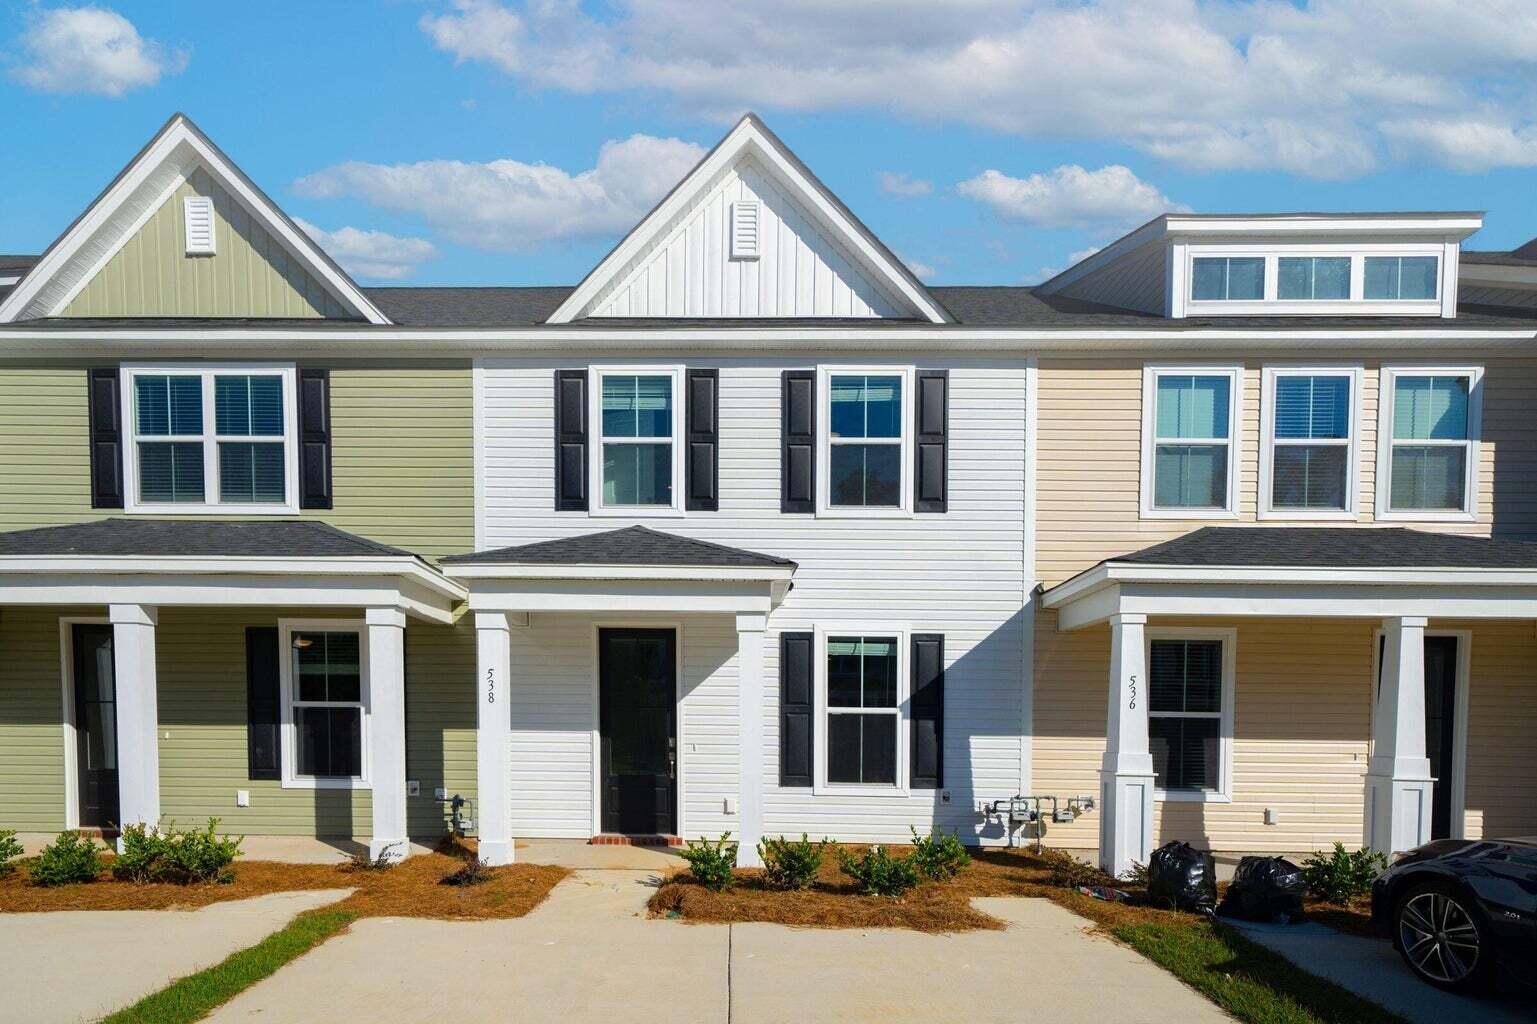 TOWNHOMES FRONT 2